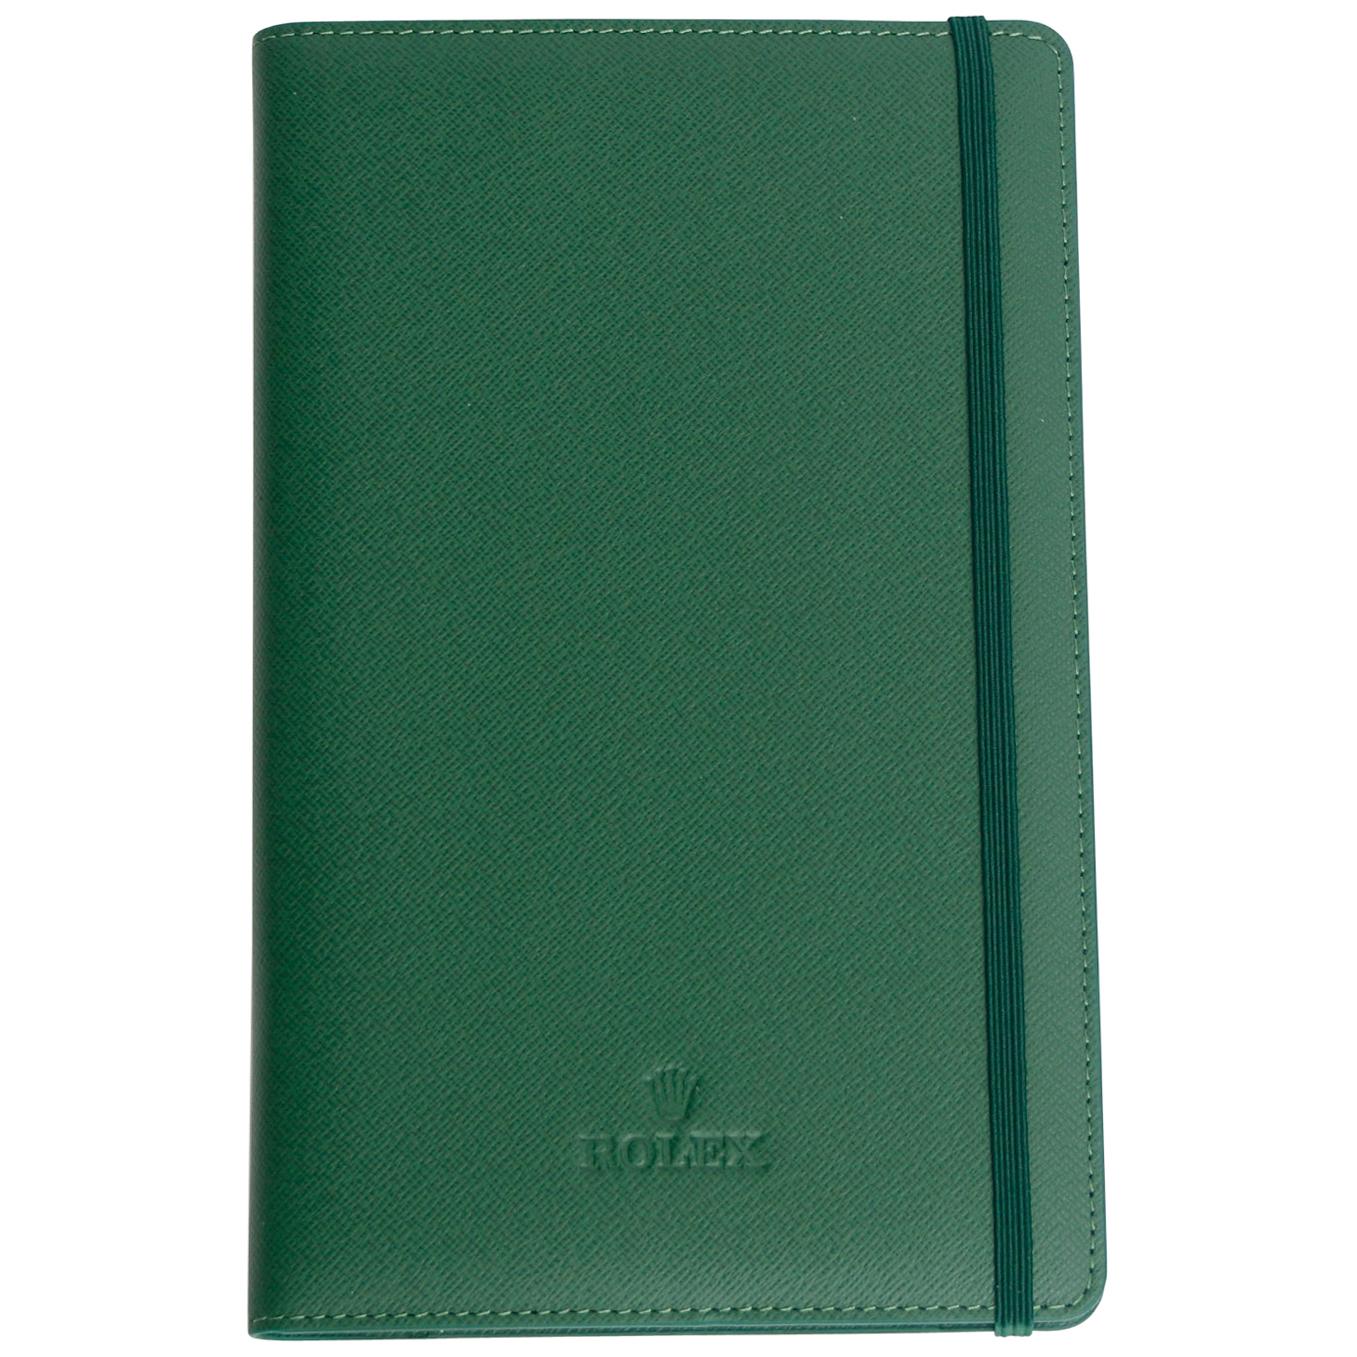 Rolex Agenda with Green Leather Cover For Sale